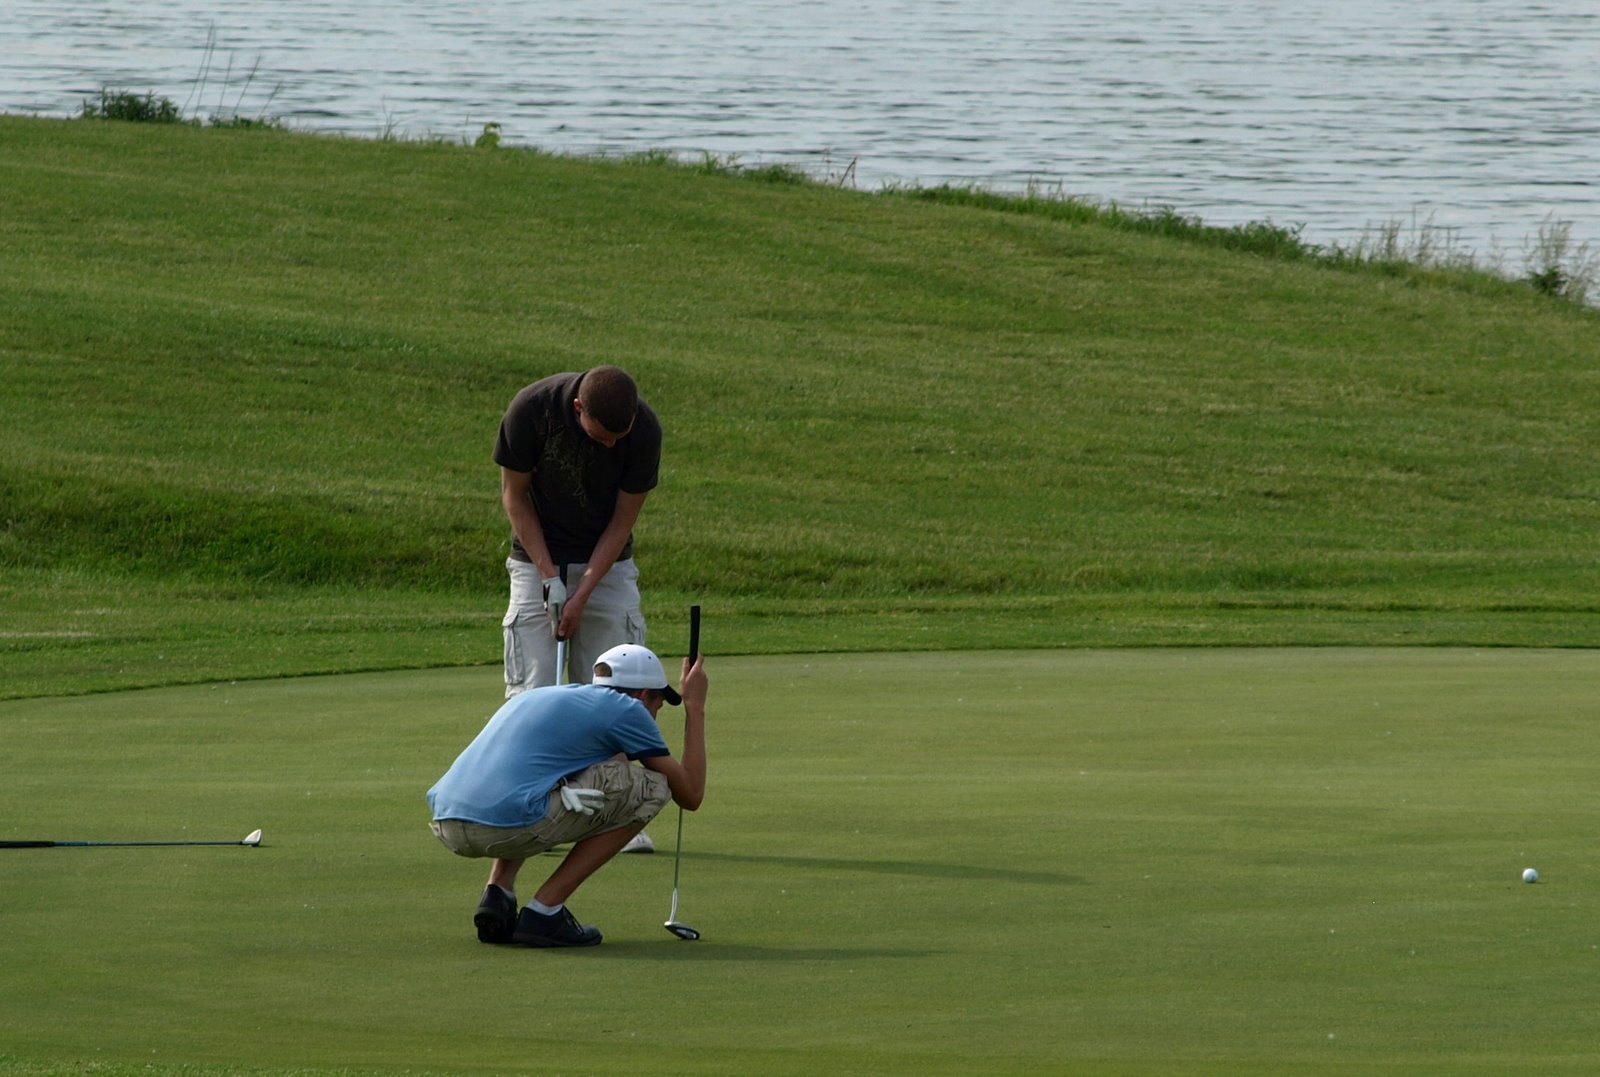 [jared+and+shawn+putting+on+#7.JPG]